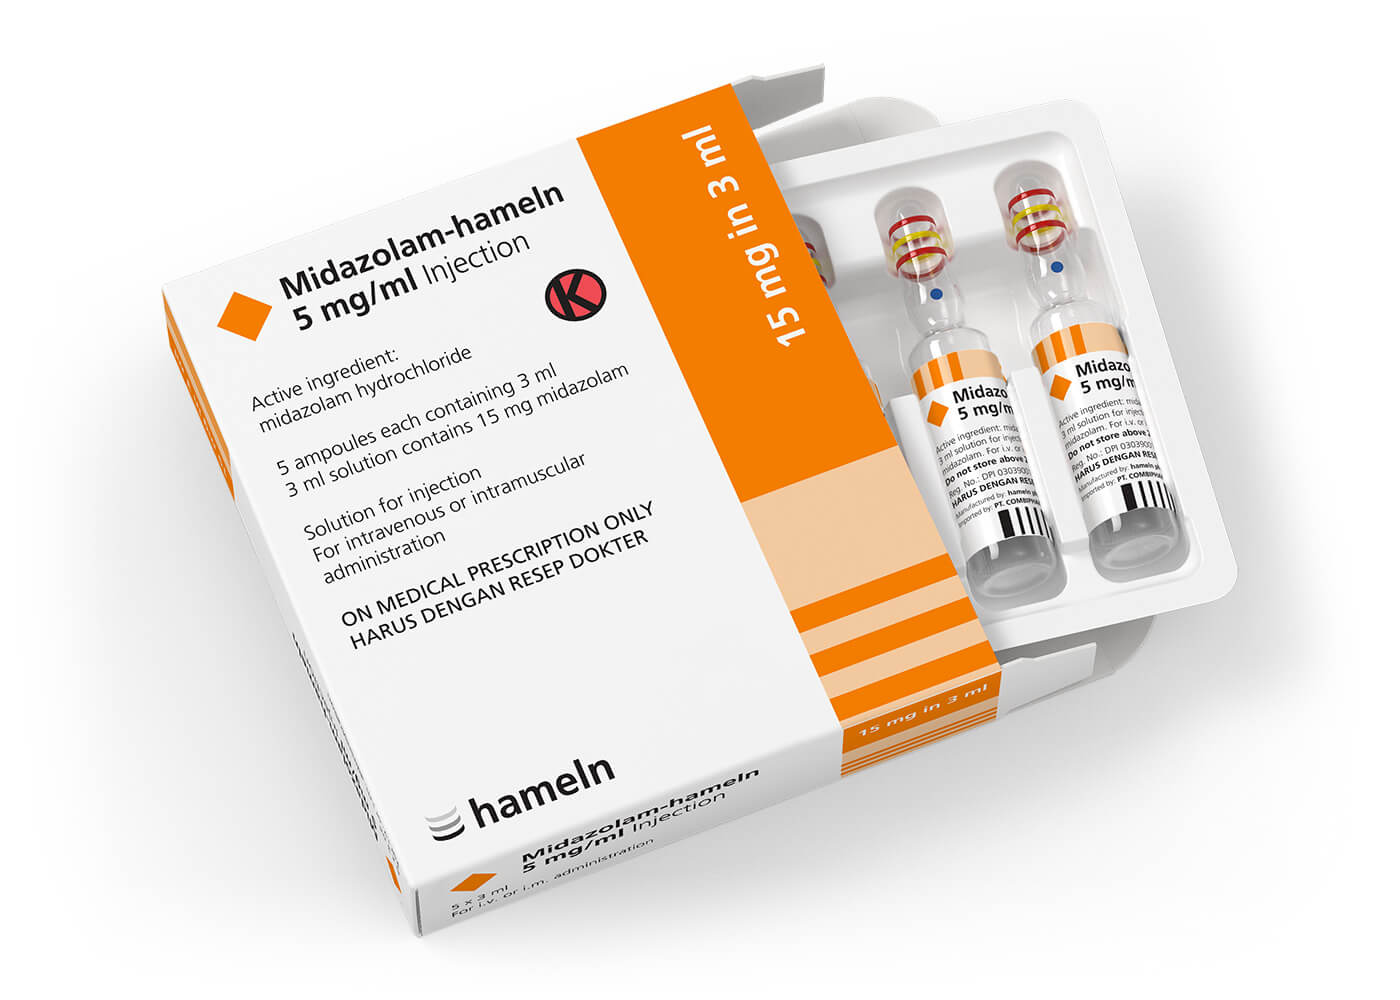 Midazolam_ID_5_mg-ml_in_3_ml_Pack-Amp_5St_SH_2009-18